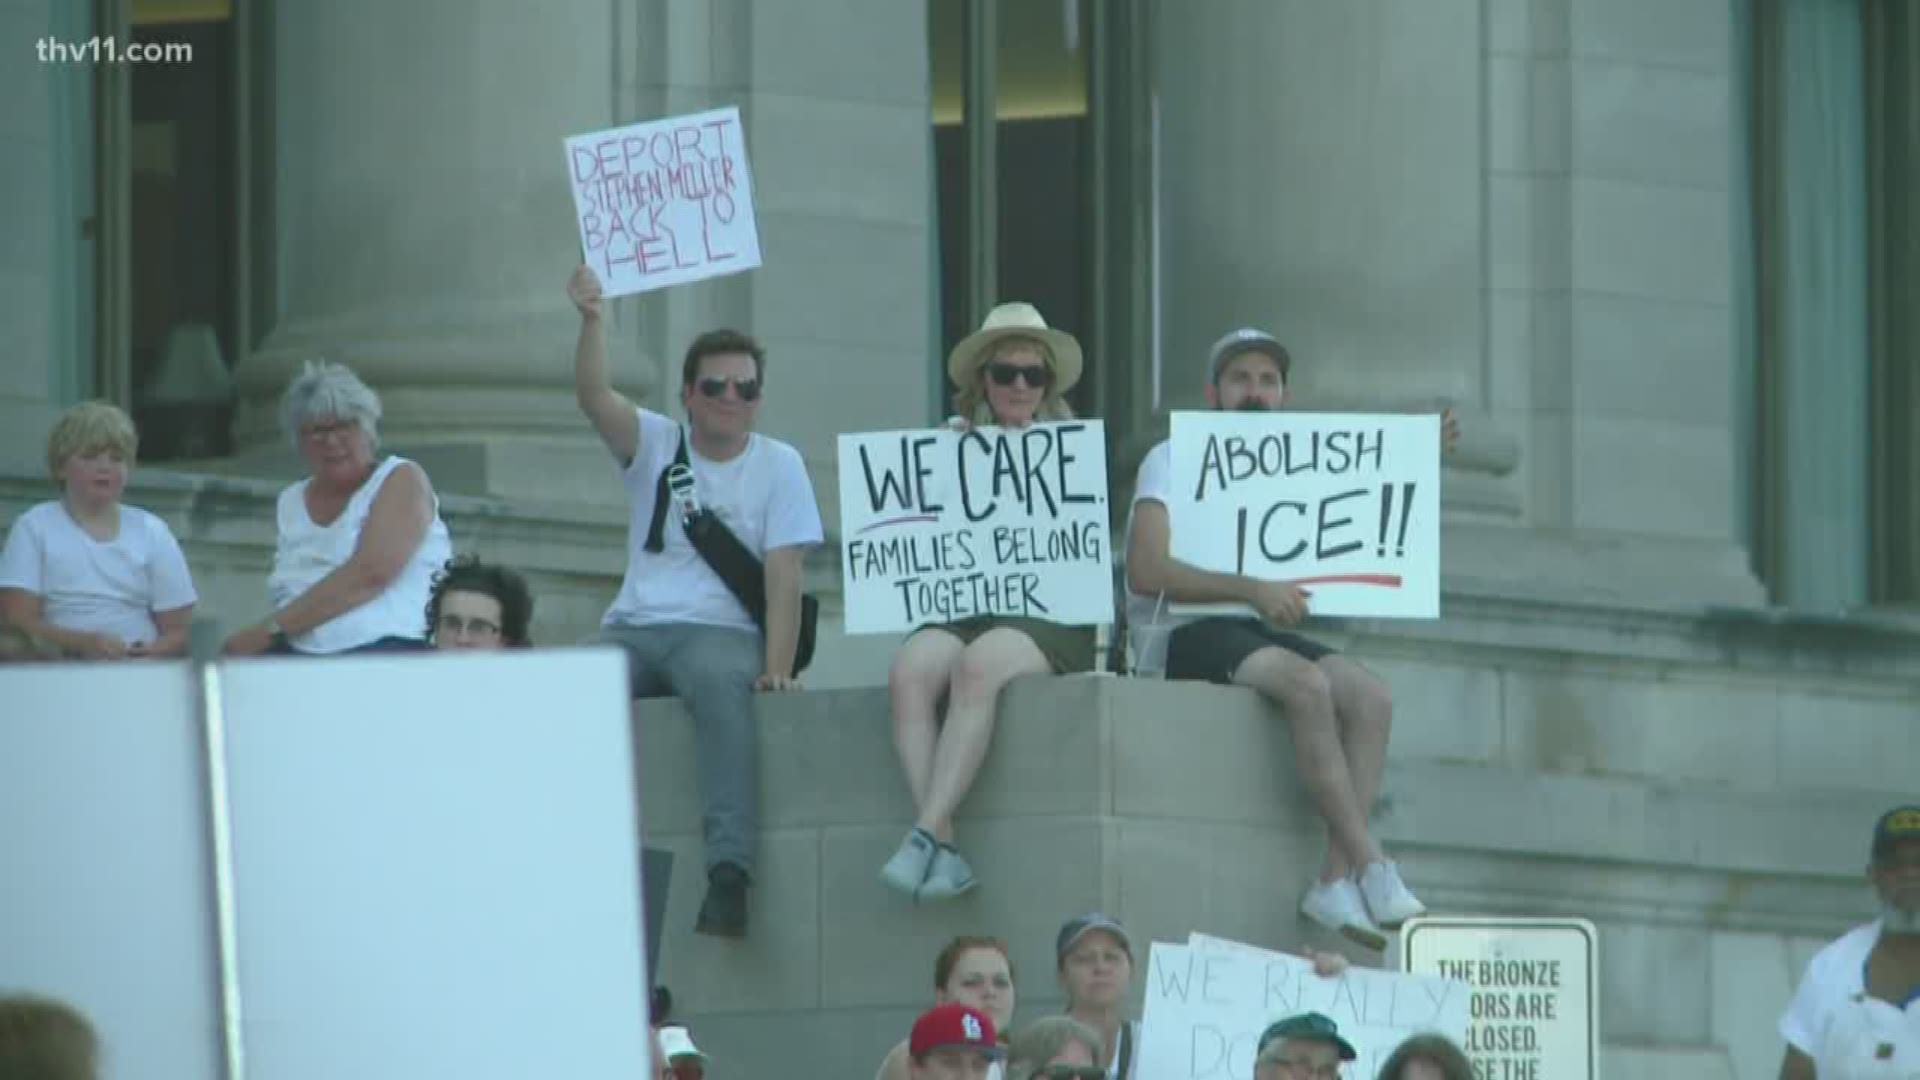 From Little Rock to Hot Springs, hundreds gathered to protest I.C.E. and family separation.